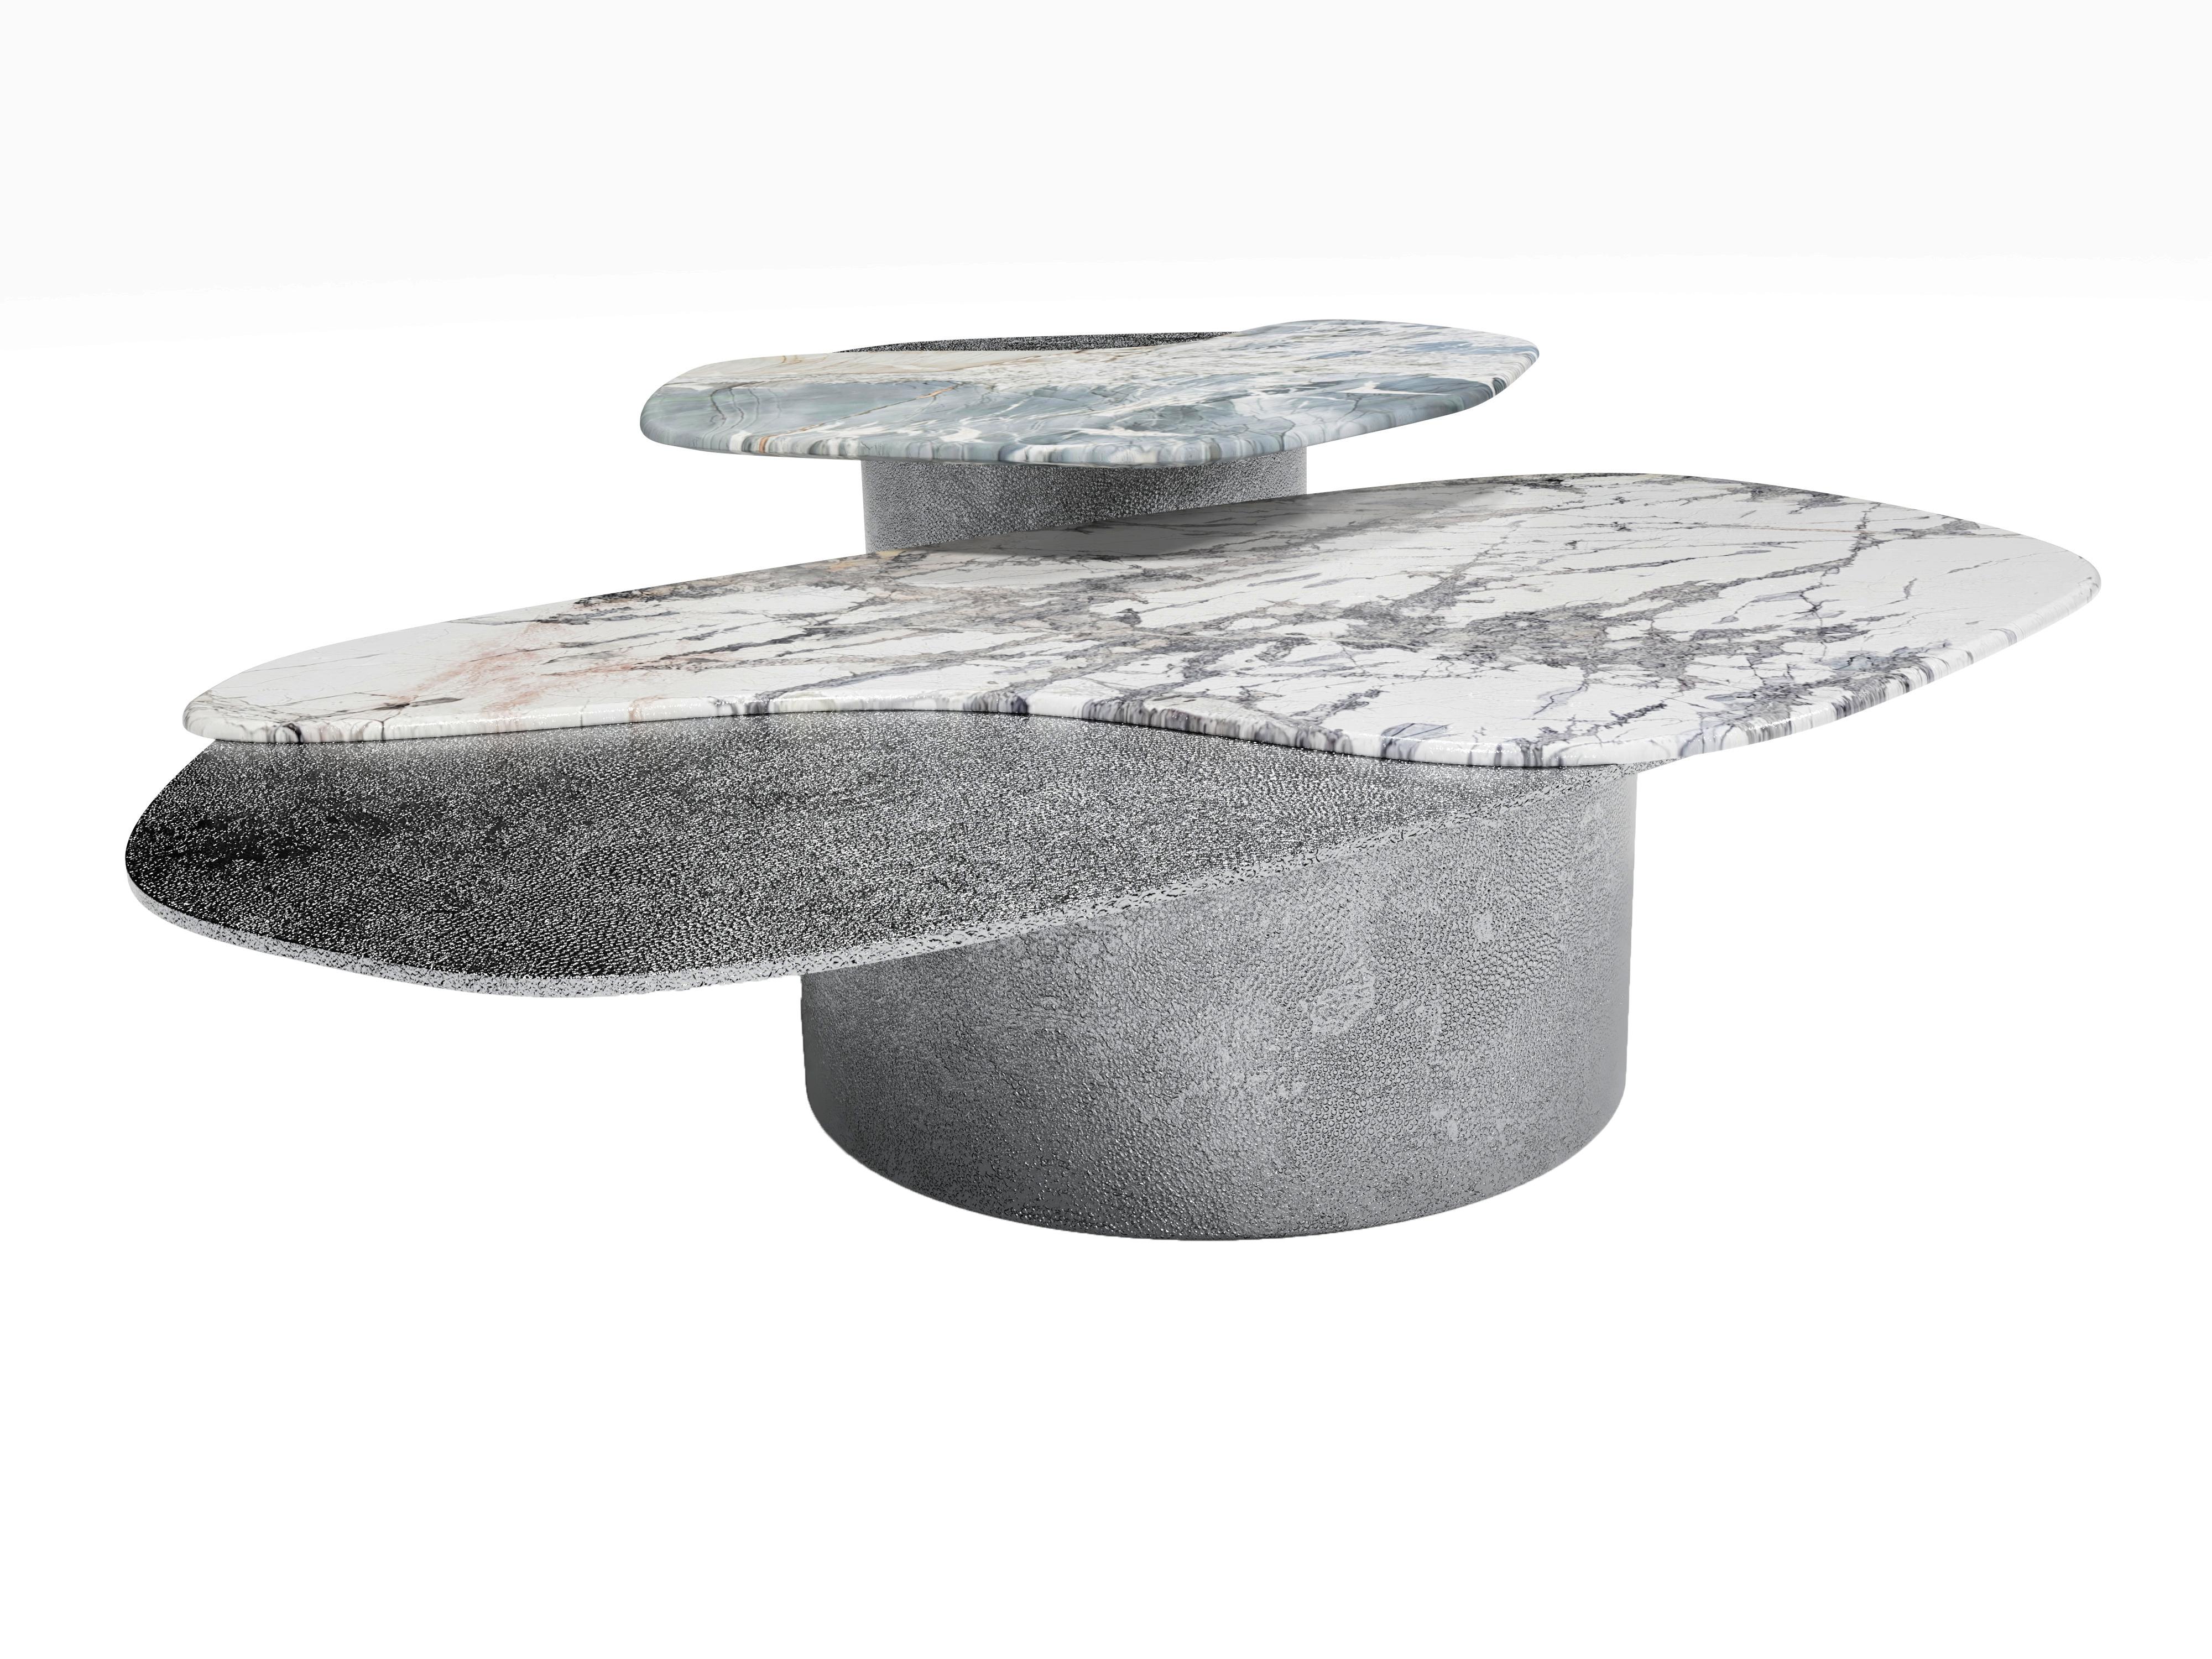 The Epicure IV coffee table set, 1 of 1 by Grzegorz Majka
Edition 1 of 1
Dimensions: 63 x 63 x 13 in
Materials: Aluminium, quartz and brass

“No man is an island entire of itself; every man is a piece of the continent, a part of the main.” The